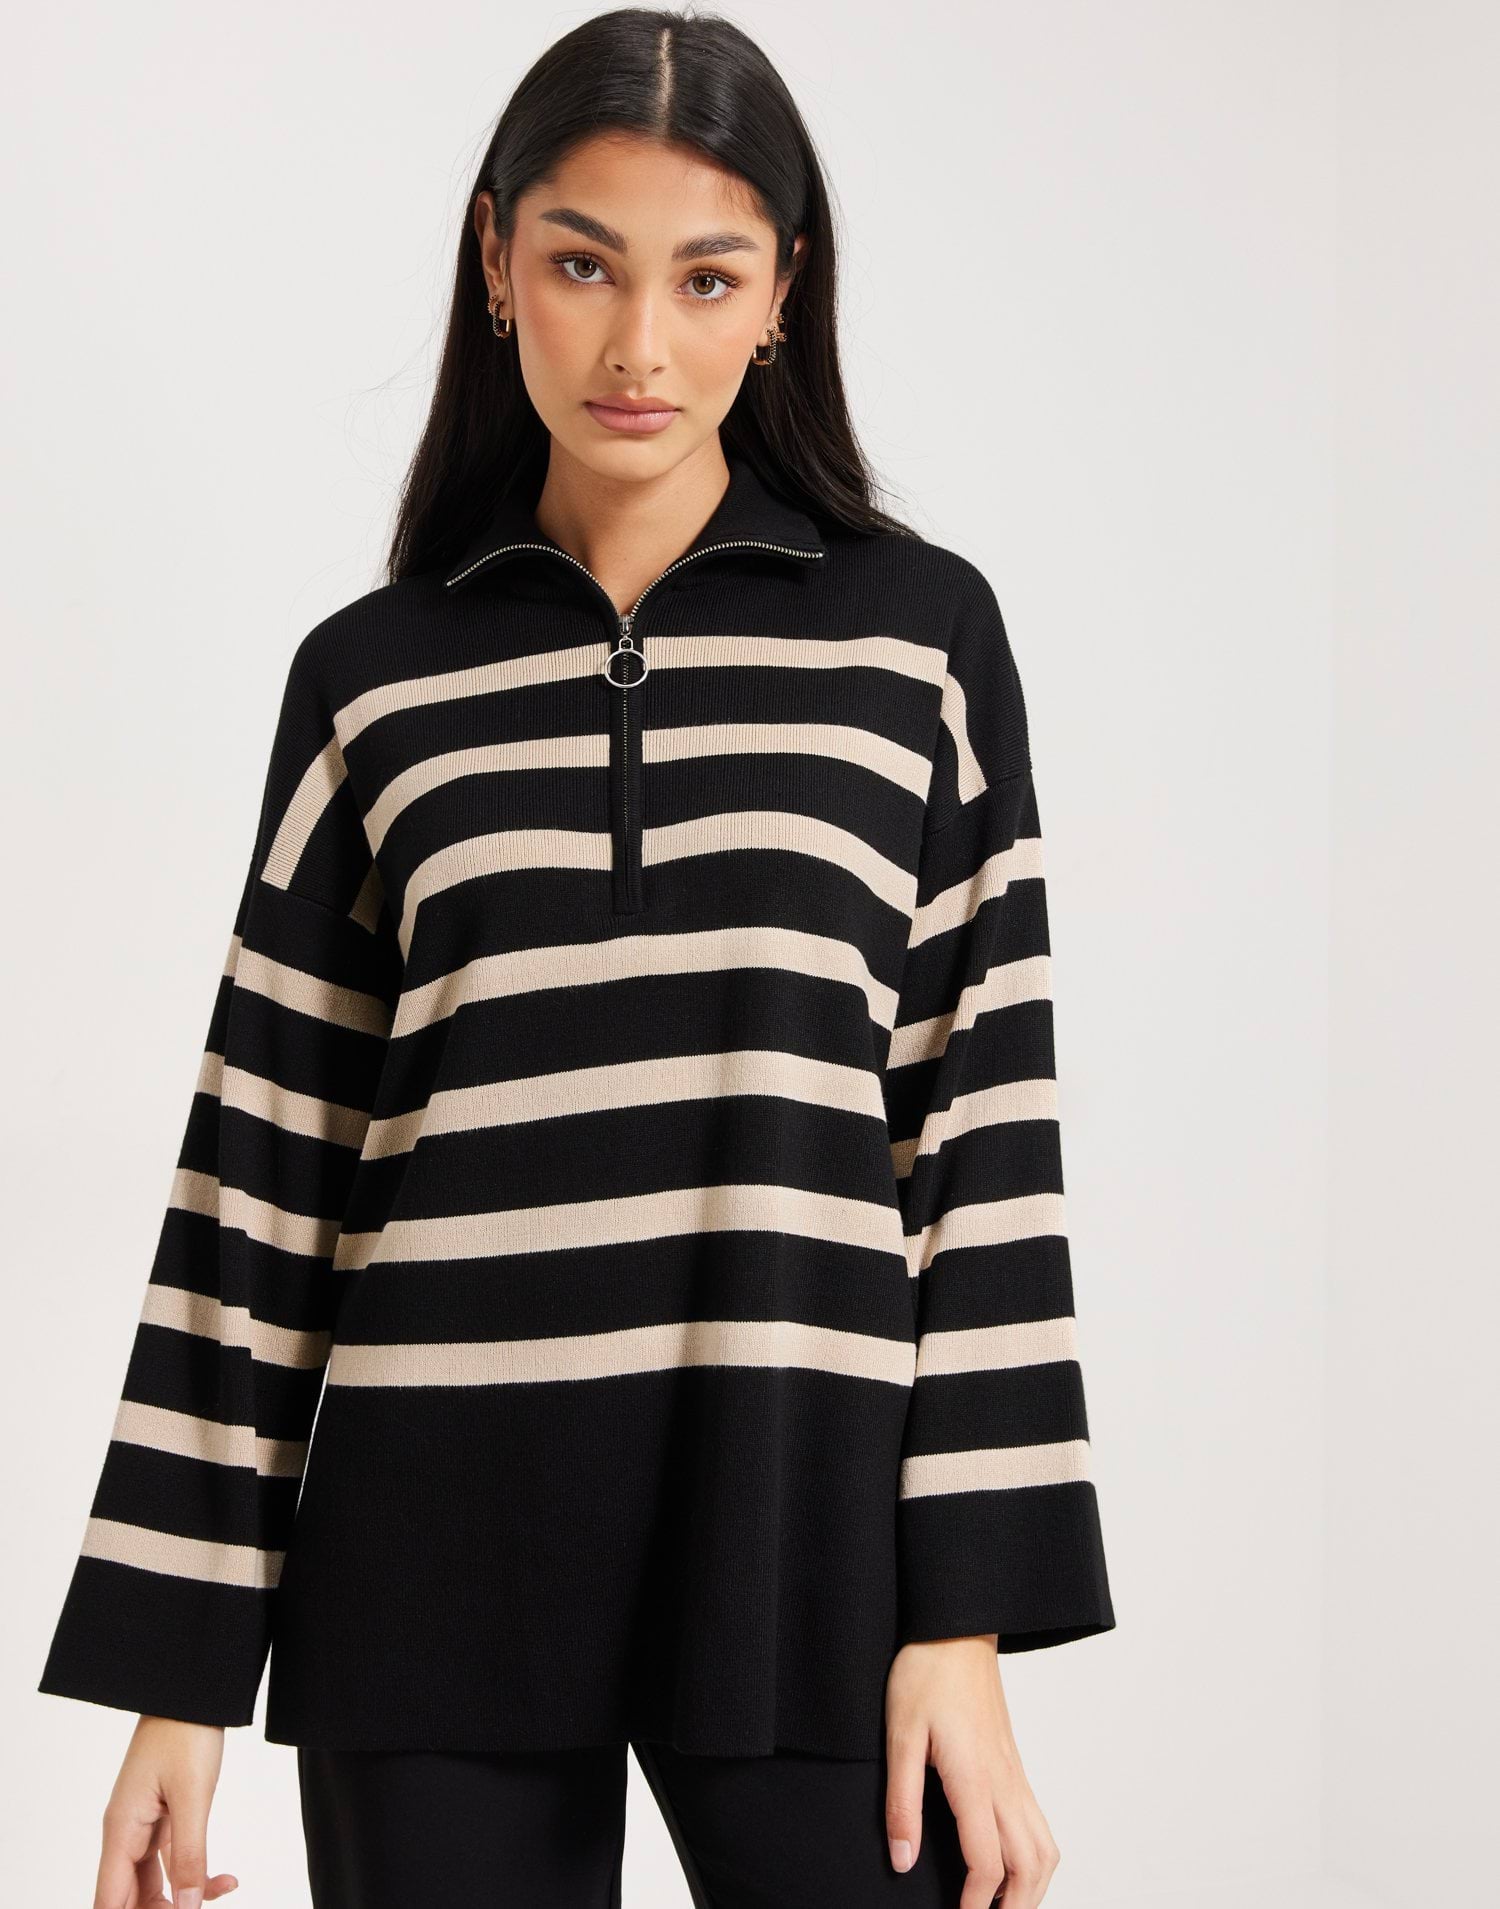 OBJESTER L/S KNIT ZIP PULLOVER NOOS